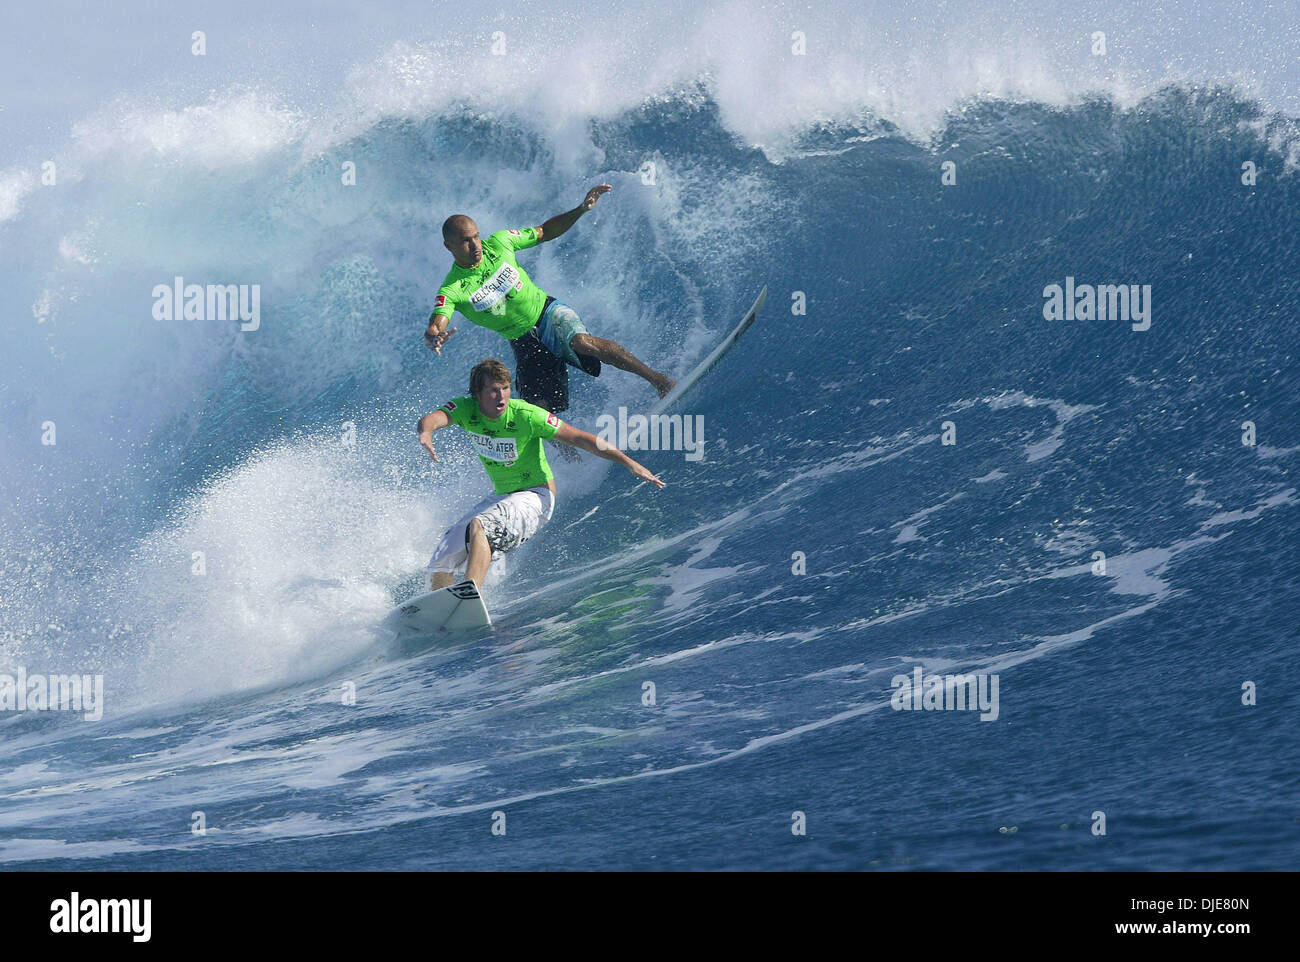 May 24, 2004; Tavarua Island, Fiji; Six times ASP world surfing champion American KELLY SLATER (Florida, USA) (pictured front) and ASP world number three Australian TAJ BURROW (Western Australia) share a wave in the Kelly Slater Invitational. Slater invited 11 of the worlds greatest surfers and several celebrities to the island paradise to showcase surfing to the celebrities and ex Stock Photo